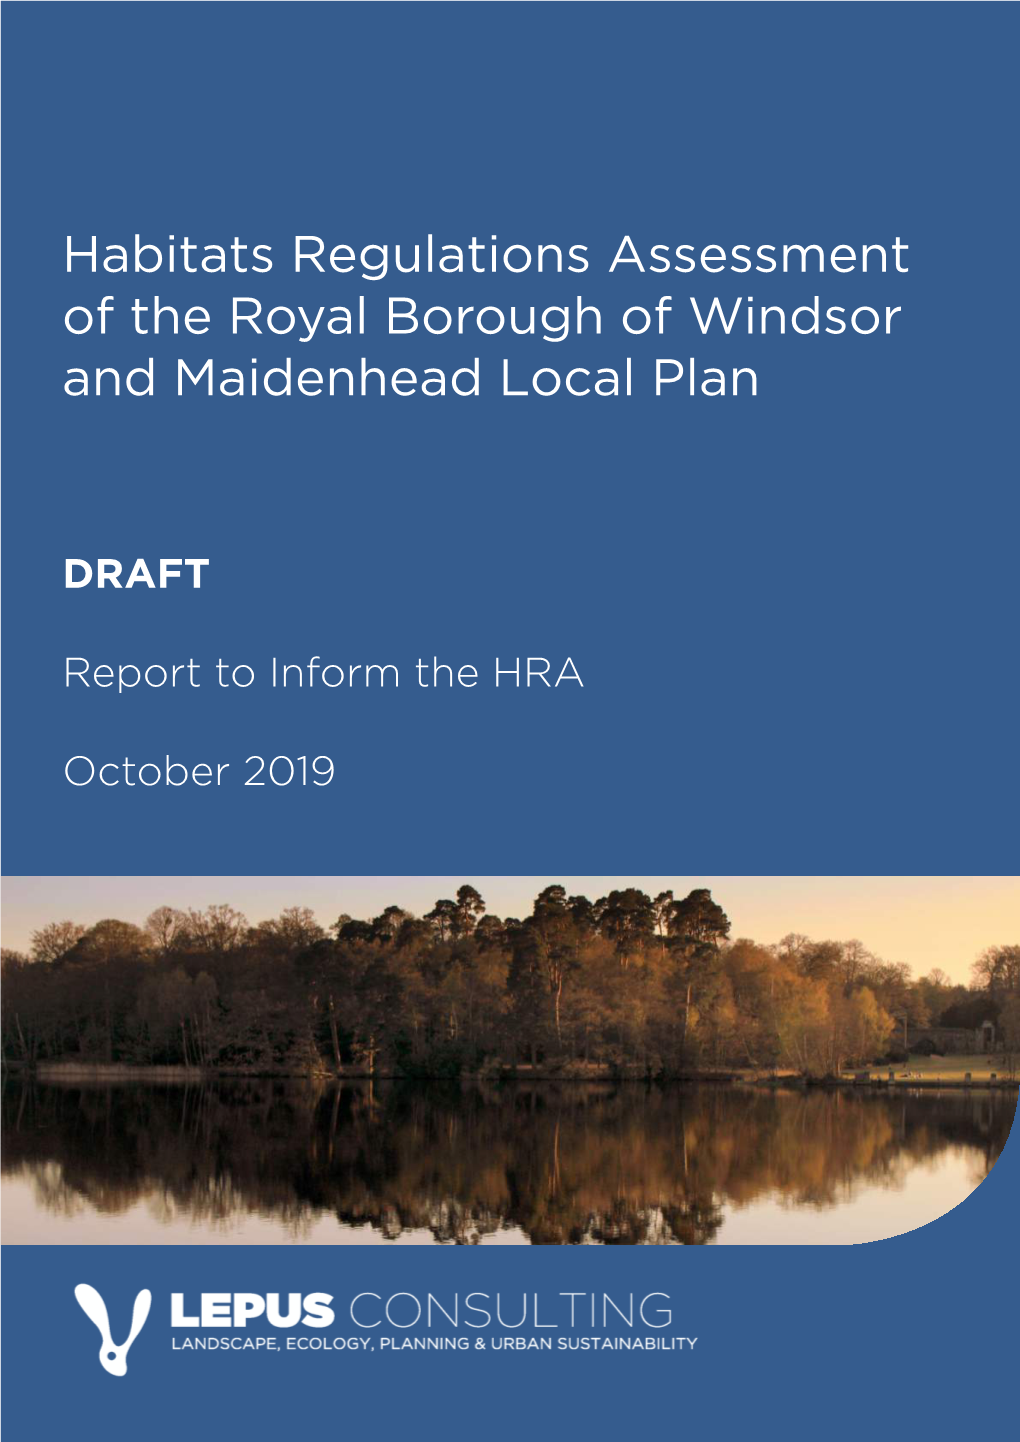 Habitats Regulations Assessment of the Royal Borough of Windsor and Maidenhead Local Plan